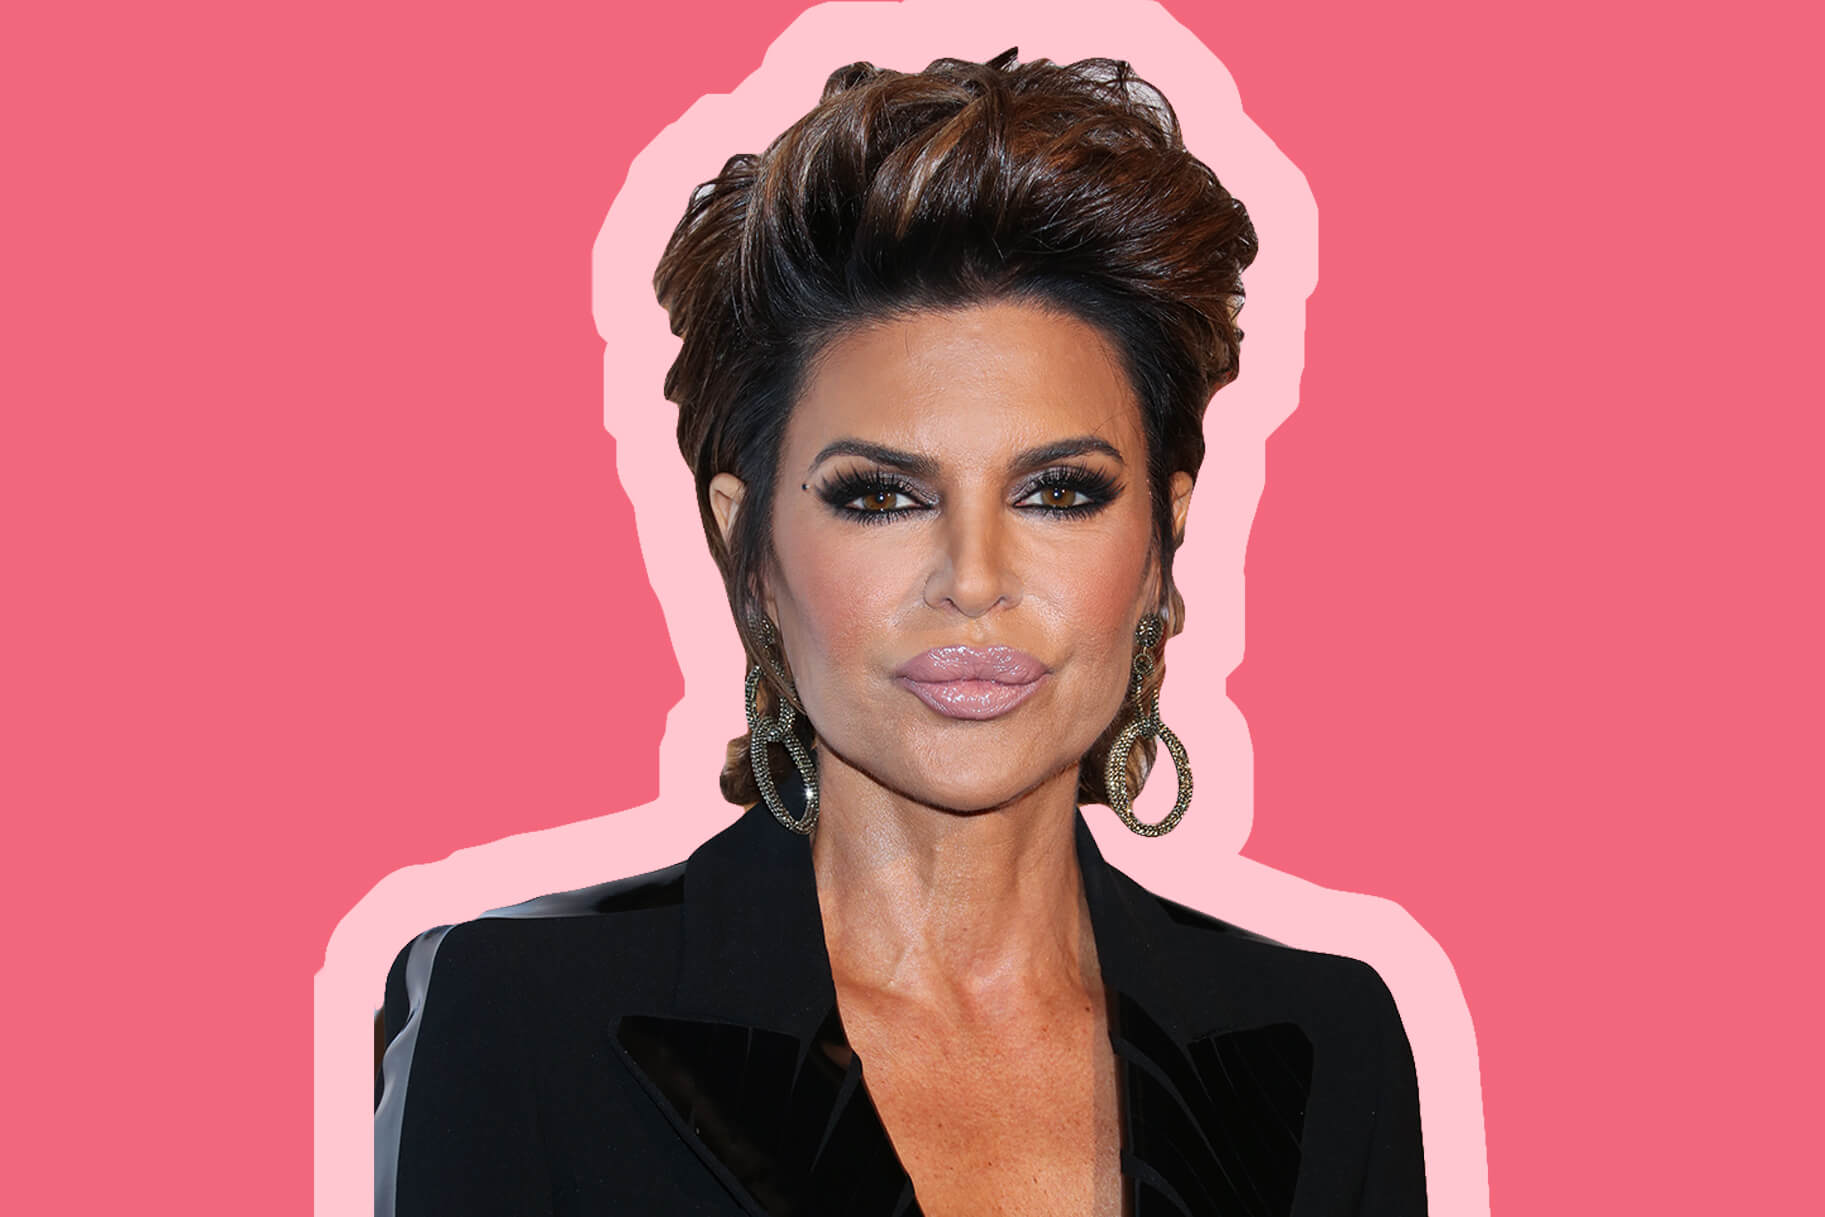 Lisa Rinna Calls Herself An ‘Asshole’ To Promote Her New Beauty Line!